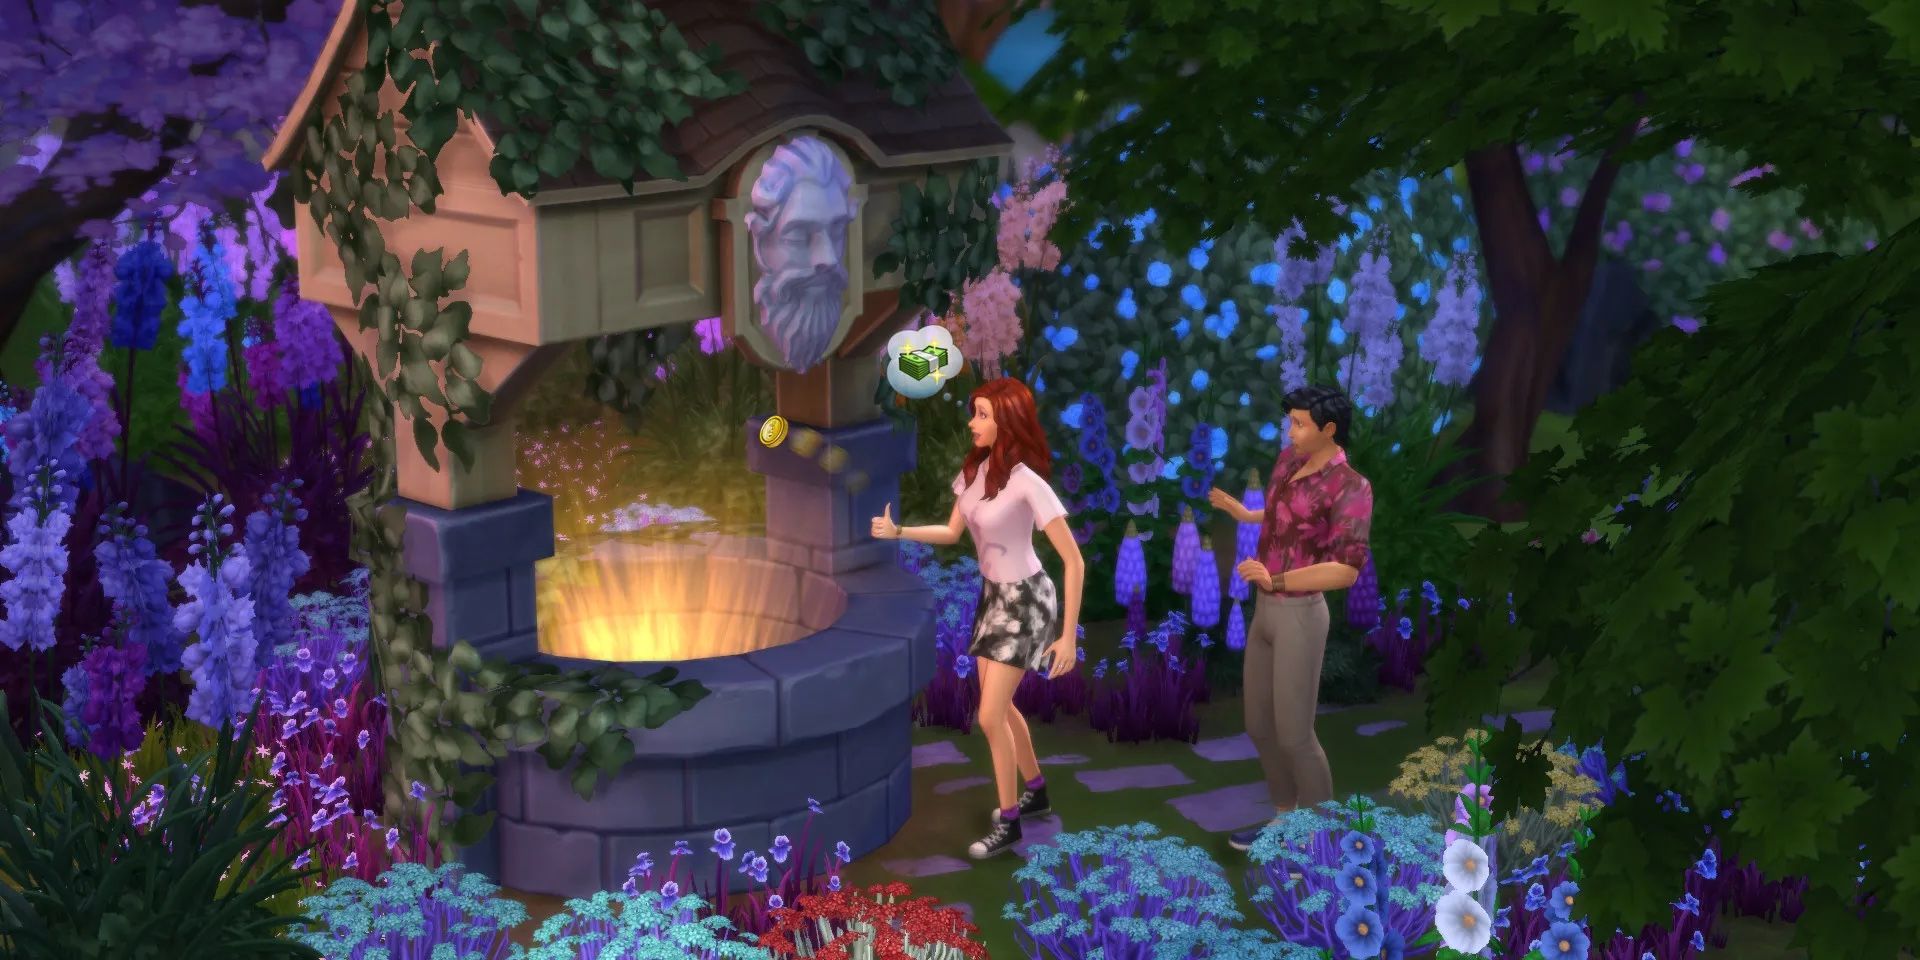 Two sims visiting the Wishing Well in Sims 4